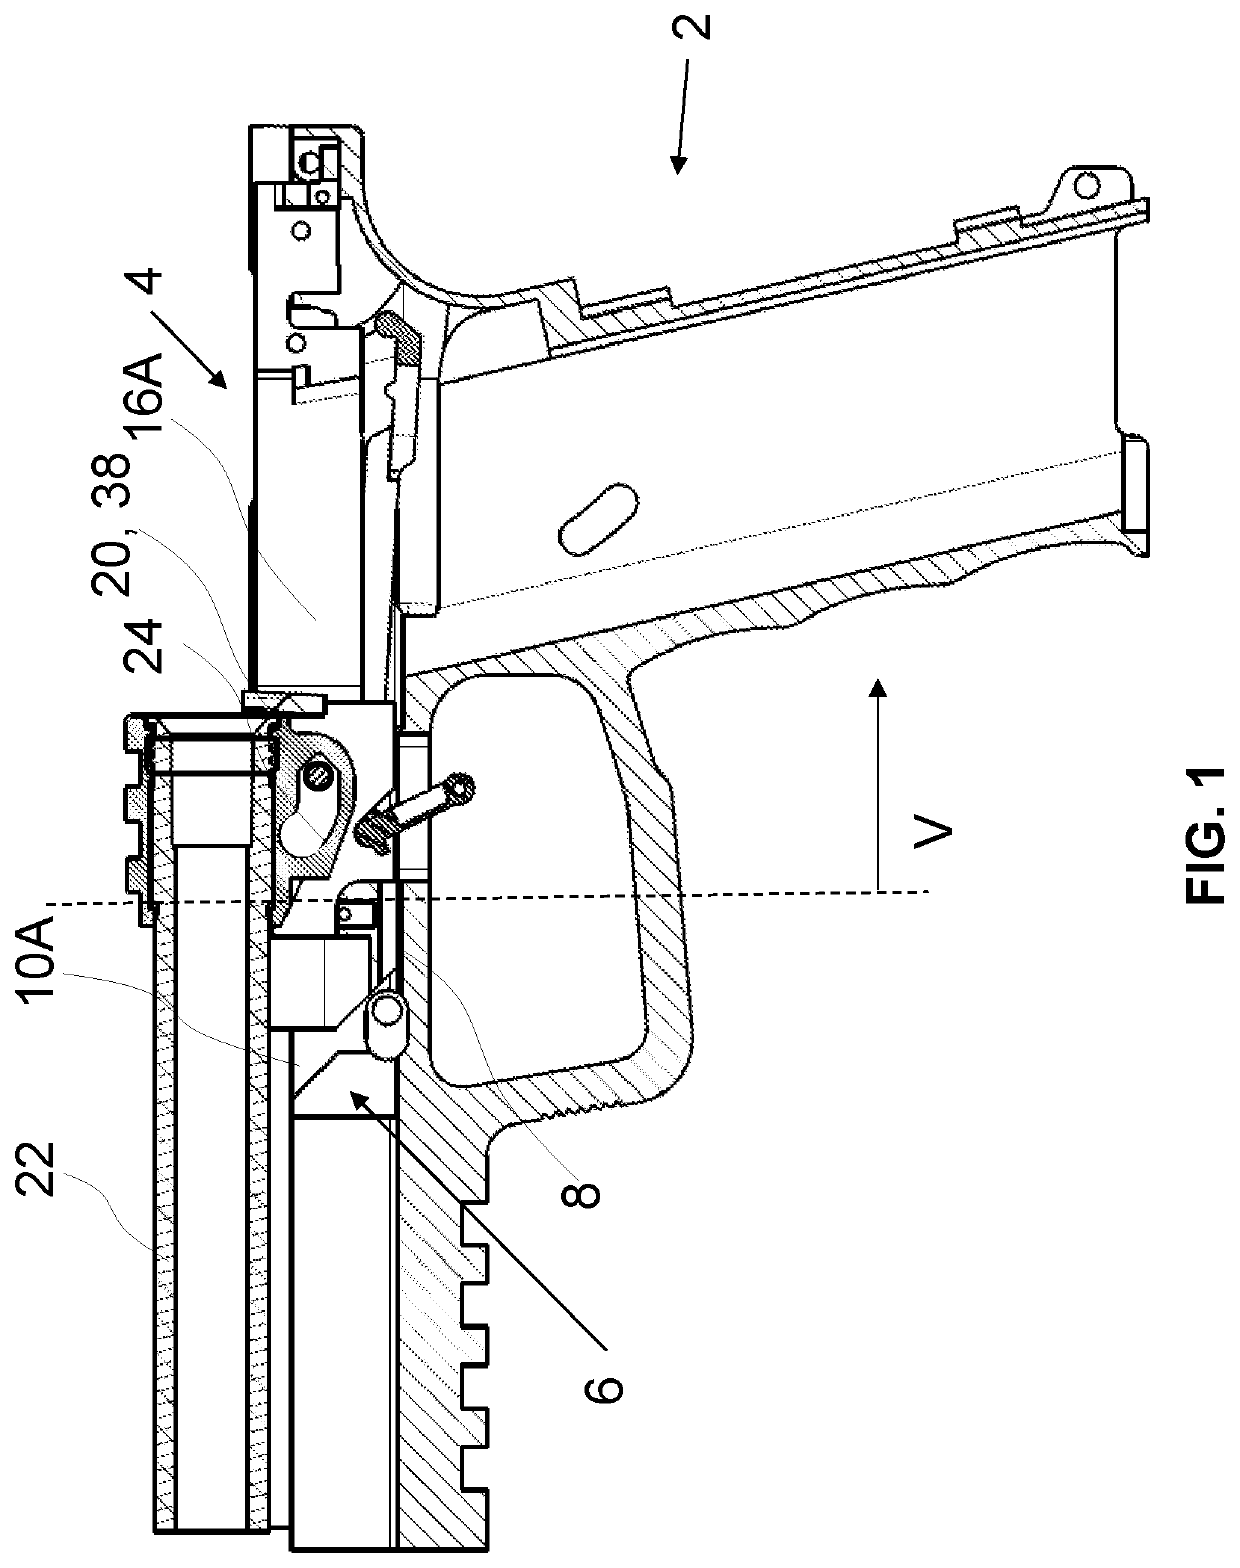 Pistol with optimized chassis anchoring